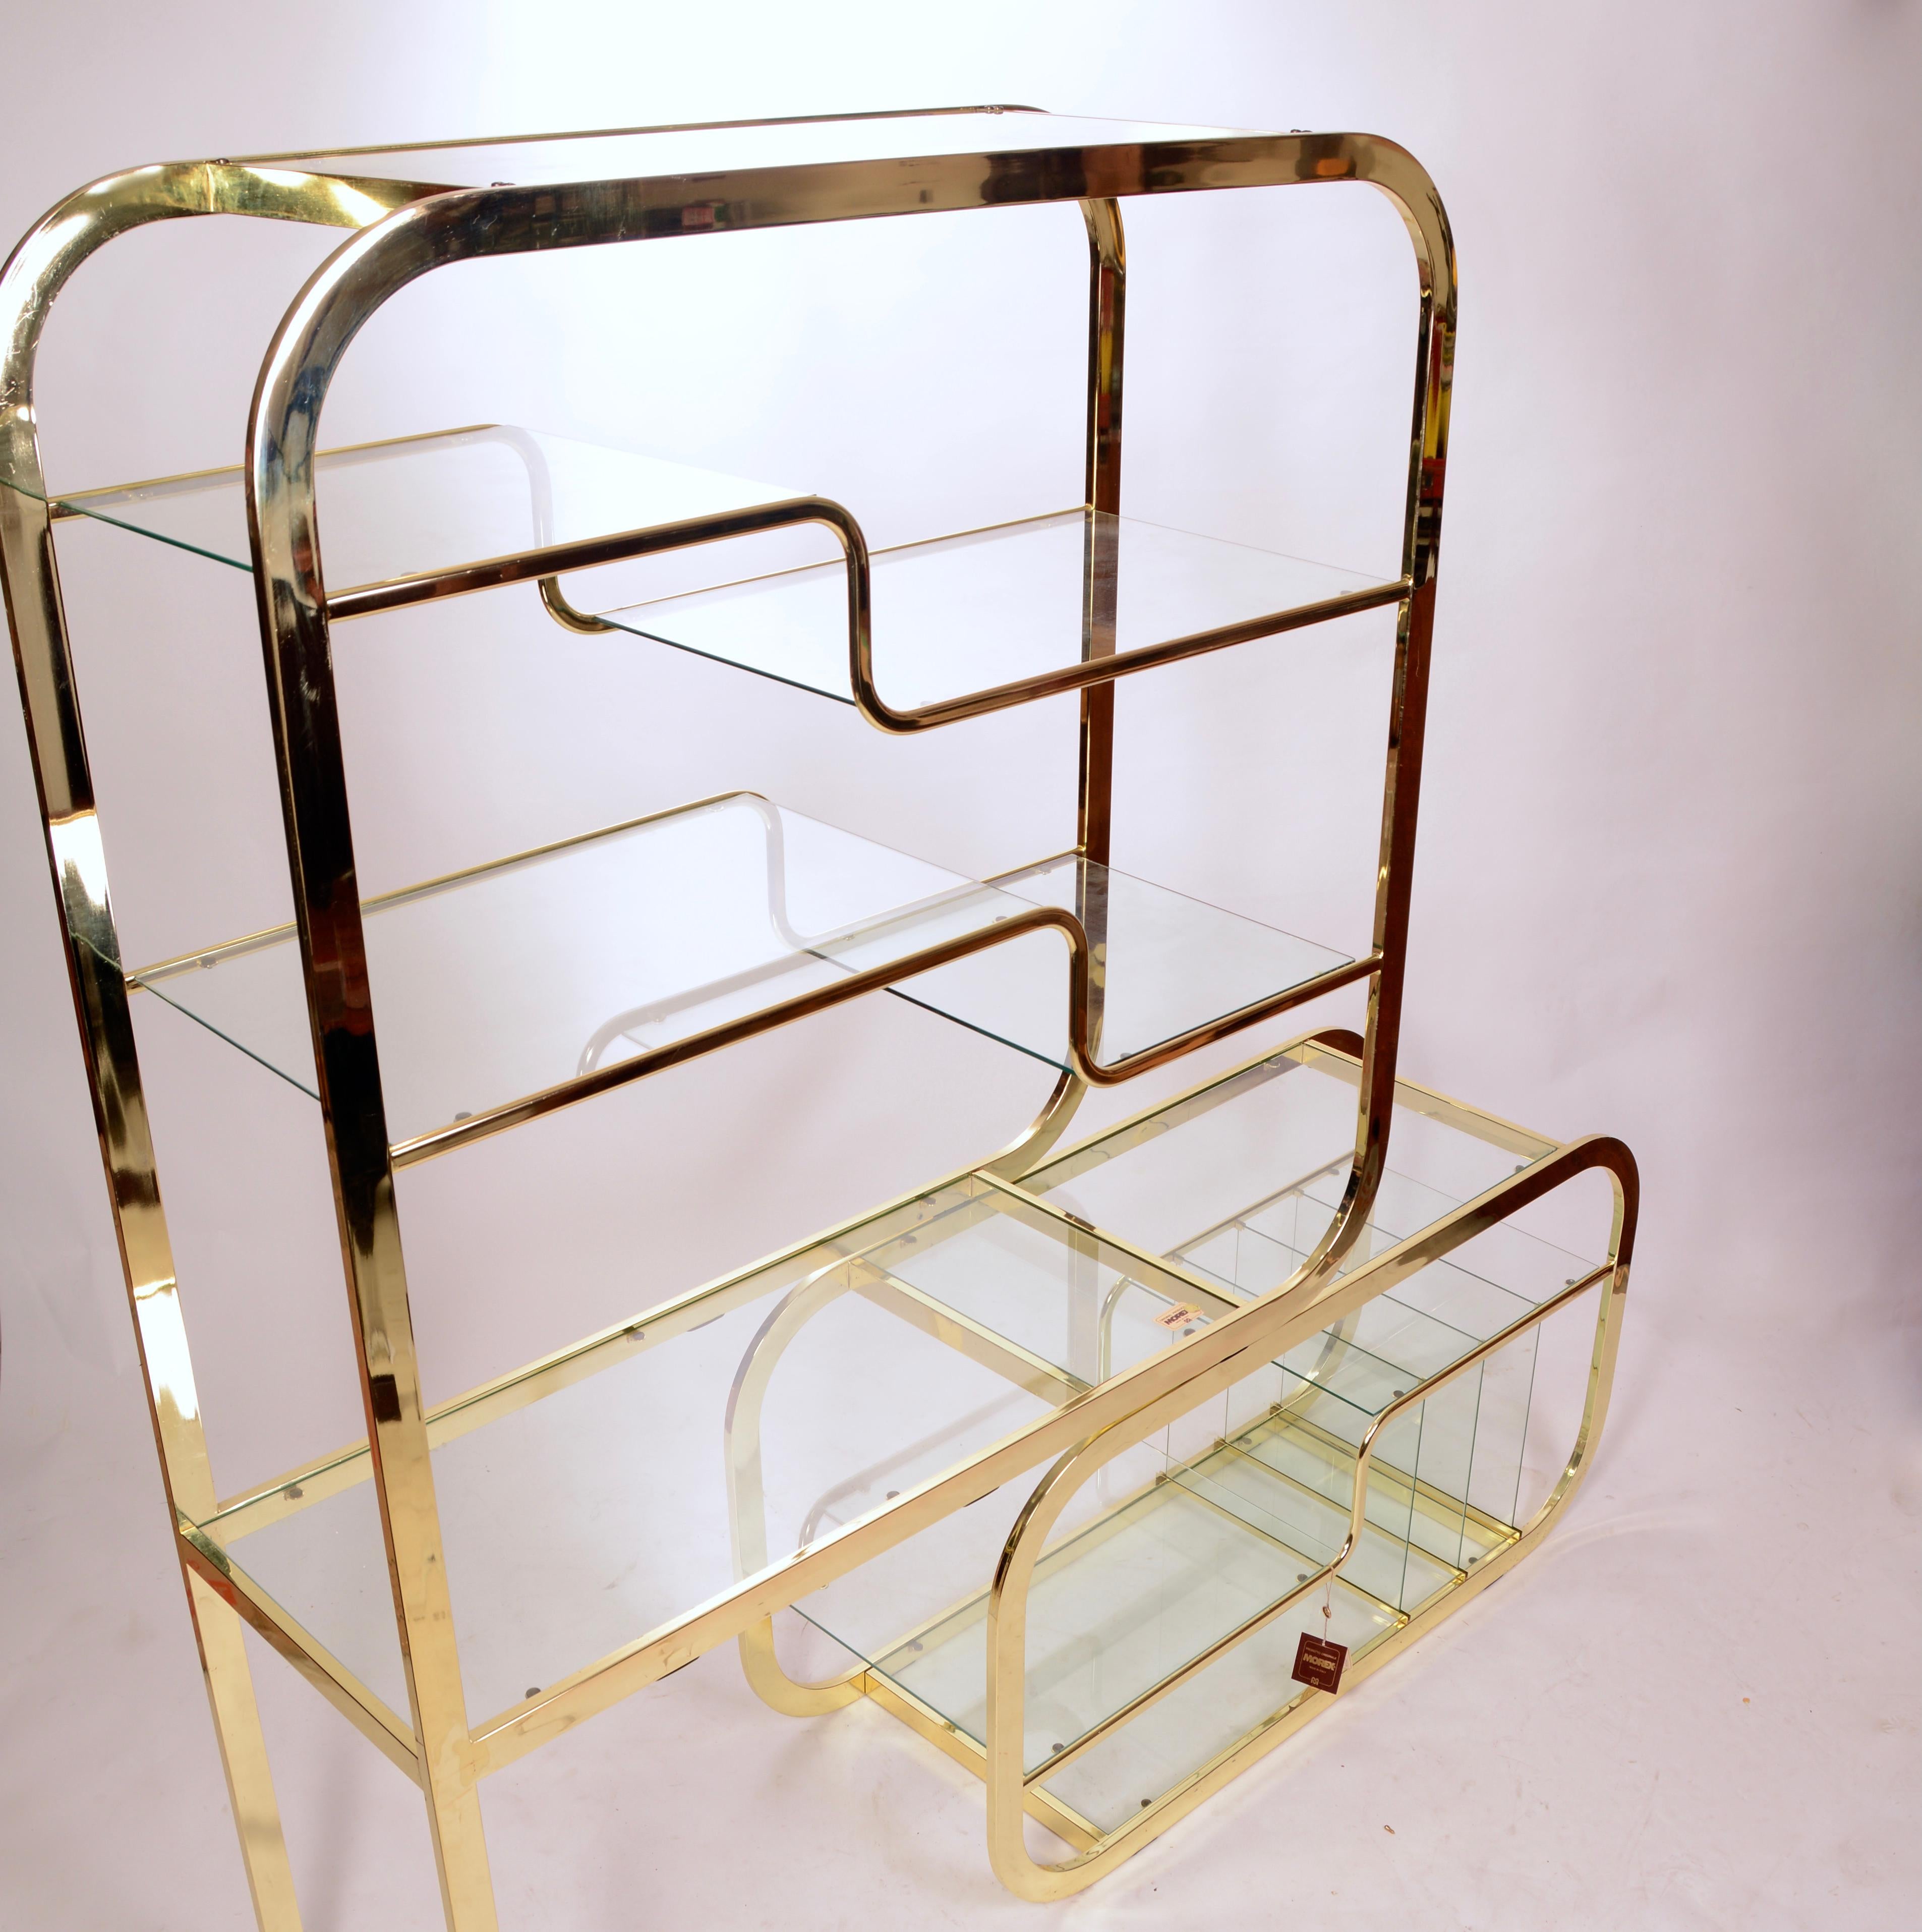 20th Century Brass and Glass Etagere by Morex of Italy